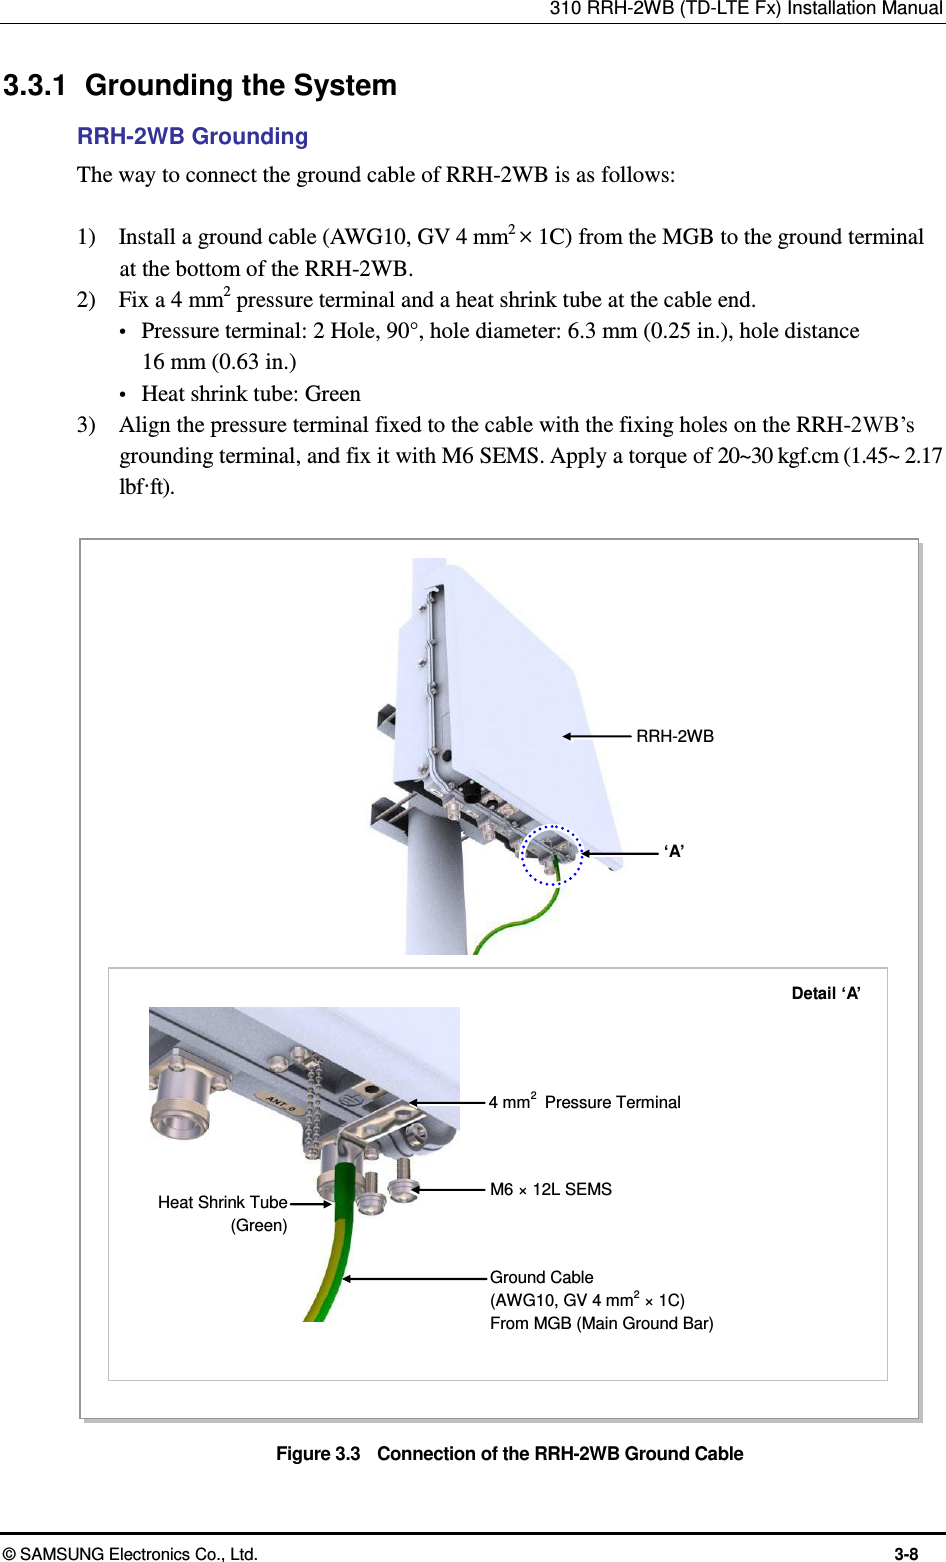 310 RRH-2WB (TD-LTE Fx) Installation Manual  © SAMSUNG Electronics Co., Ltd.  3-8 3.3.1  Grounding the System RRH-2WB Grounding The way to connect the ground cable of RRH-2WB is as follows:  1)    Install a ground cable (AWG10, GV 4 mm2 × 1C) from the MGB to the ground terminal at the bottom of the RRH-2WB. 2)    Fix a 4 mm2 pressure terminal and a heat shrink tube at the cable end.  Pressure terminal: 2 Hole, 90°, hole diameter: 6.3 mm (0.25 in.), hole distance 16 mm (0.63 in.)  Heat shrink tube: Green 3)    Align the pressure terminal fixed to the cable with the fixing holes on the RRH-2WB’s grounding terminal, and fix it with M6 SEMS. Apply a torque of 20~30 kgf.cm (1.45~ 2.17 lbf·ft).  Figure 3.3    Connection of the RRH-2WB Ground Cable Heat Shrink Tube   (Green) RRH-2WB Ground Cable (AWG10, GV 4 mm2 × 1C) From MGB (Main Ground Bar) Detail ‘A’ ‘A’ M6 × 12L SEMS 4 mm2 Pressure Terminal 